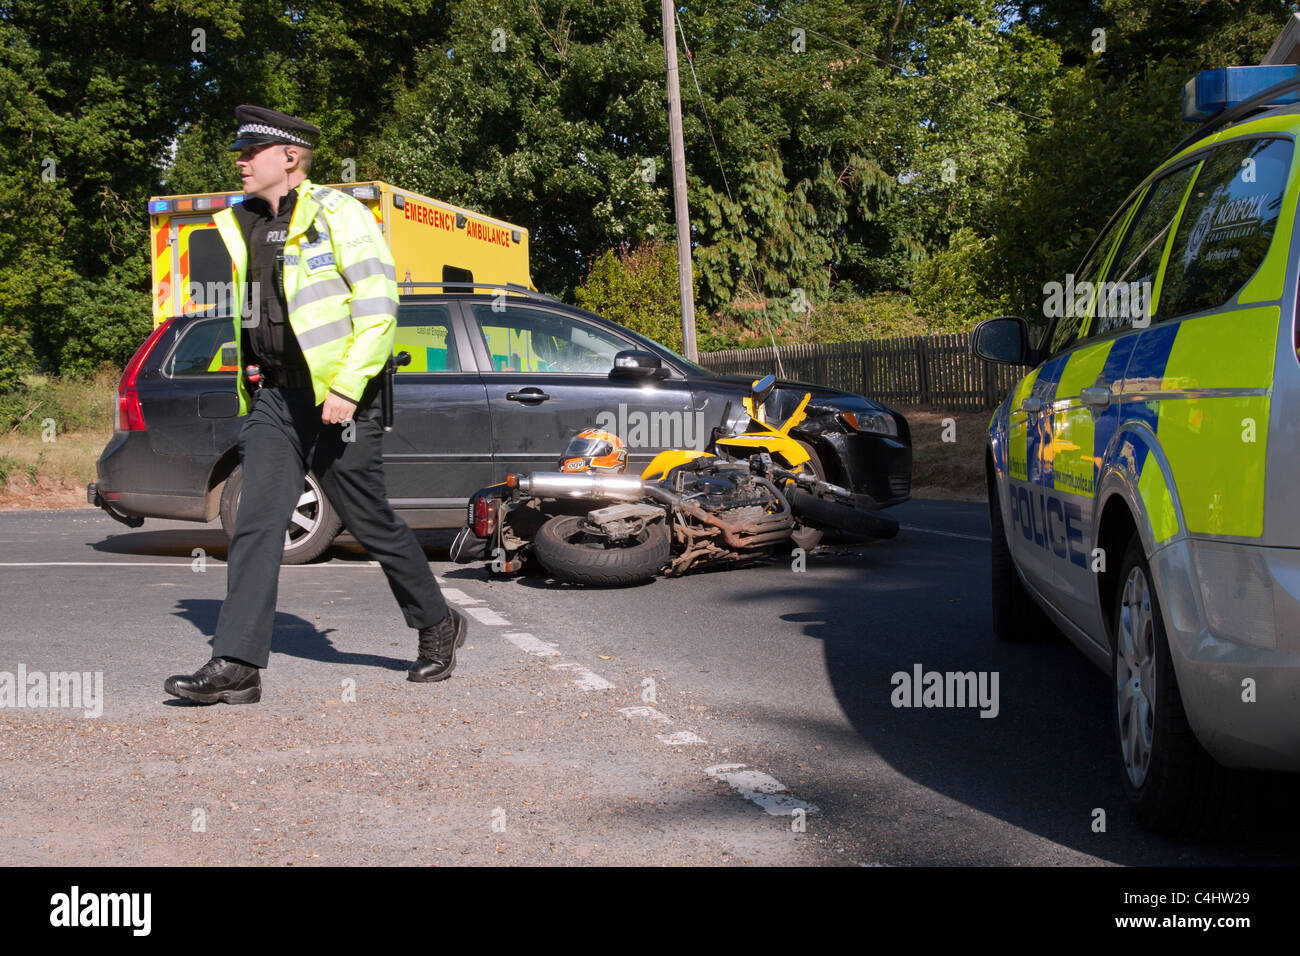 Aftermath of a road traffic accident involving a car & a motorbike. Stock Photo